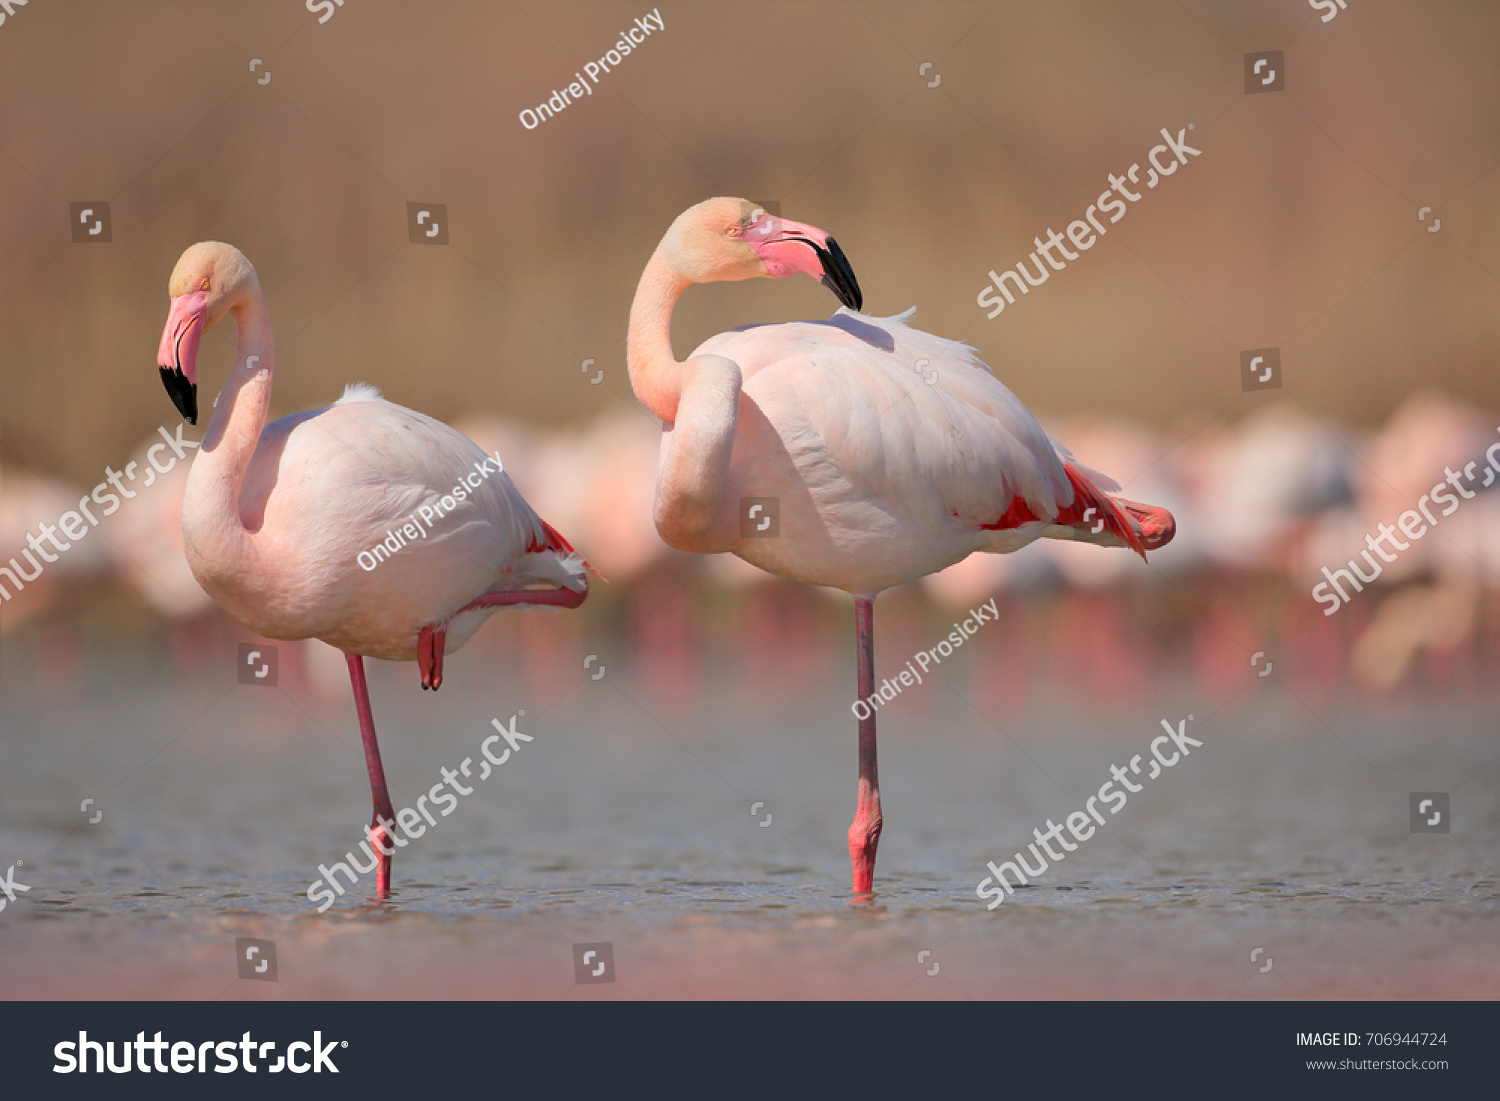 Pink big birds Greater Flamingos, Phoenicopterus ruber, in the water, Camargue, France. Flamingos cleaning feathers. Wildlife animal scene from nature. #706944724